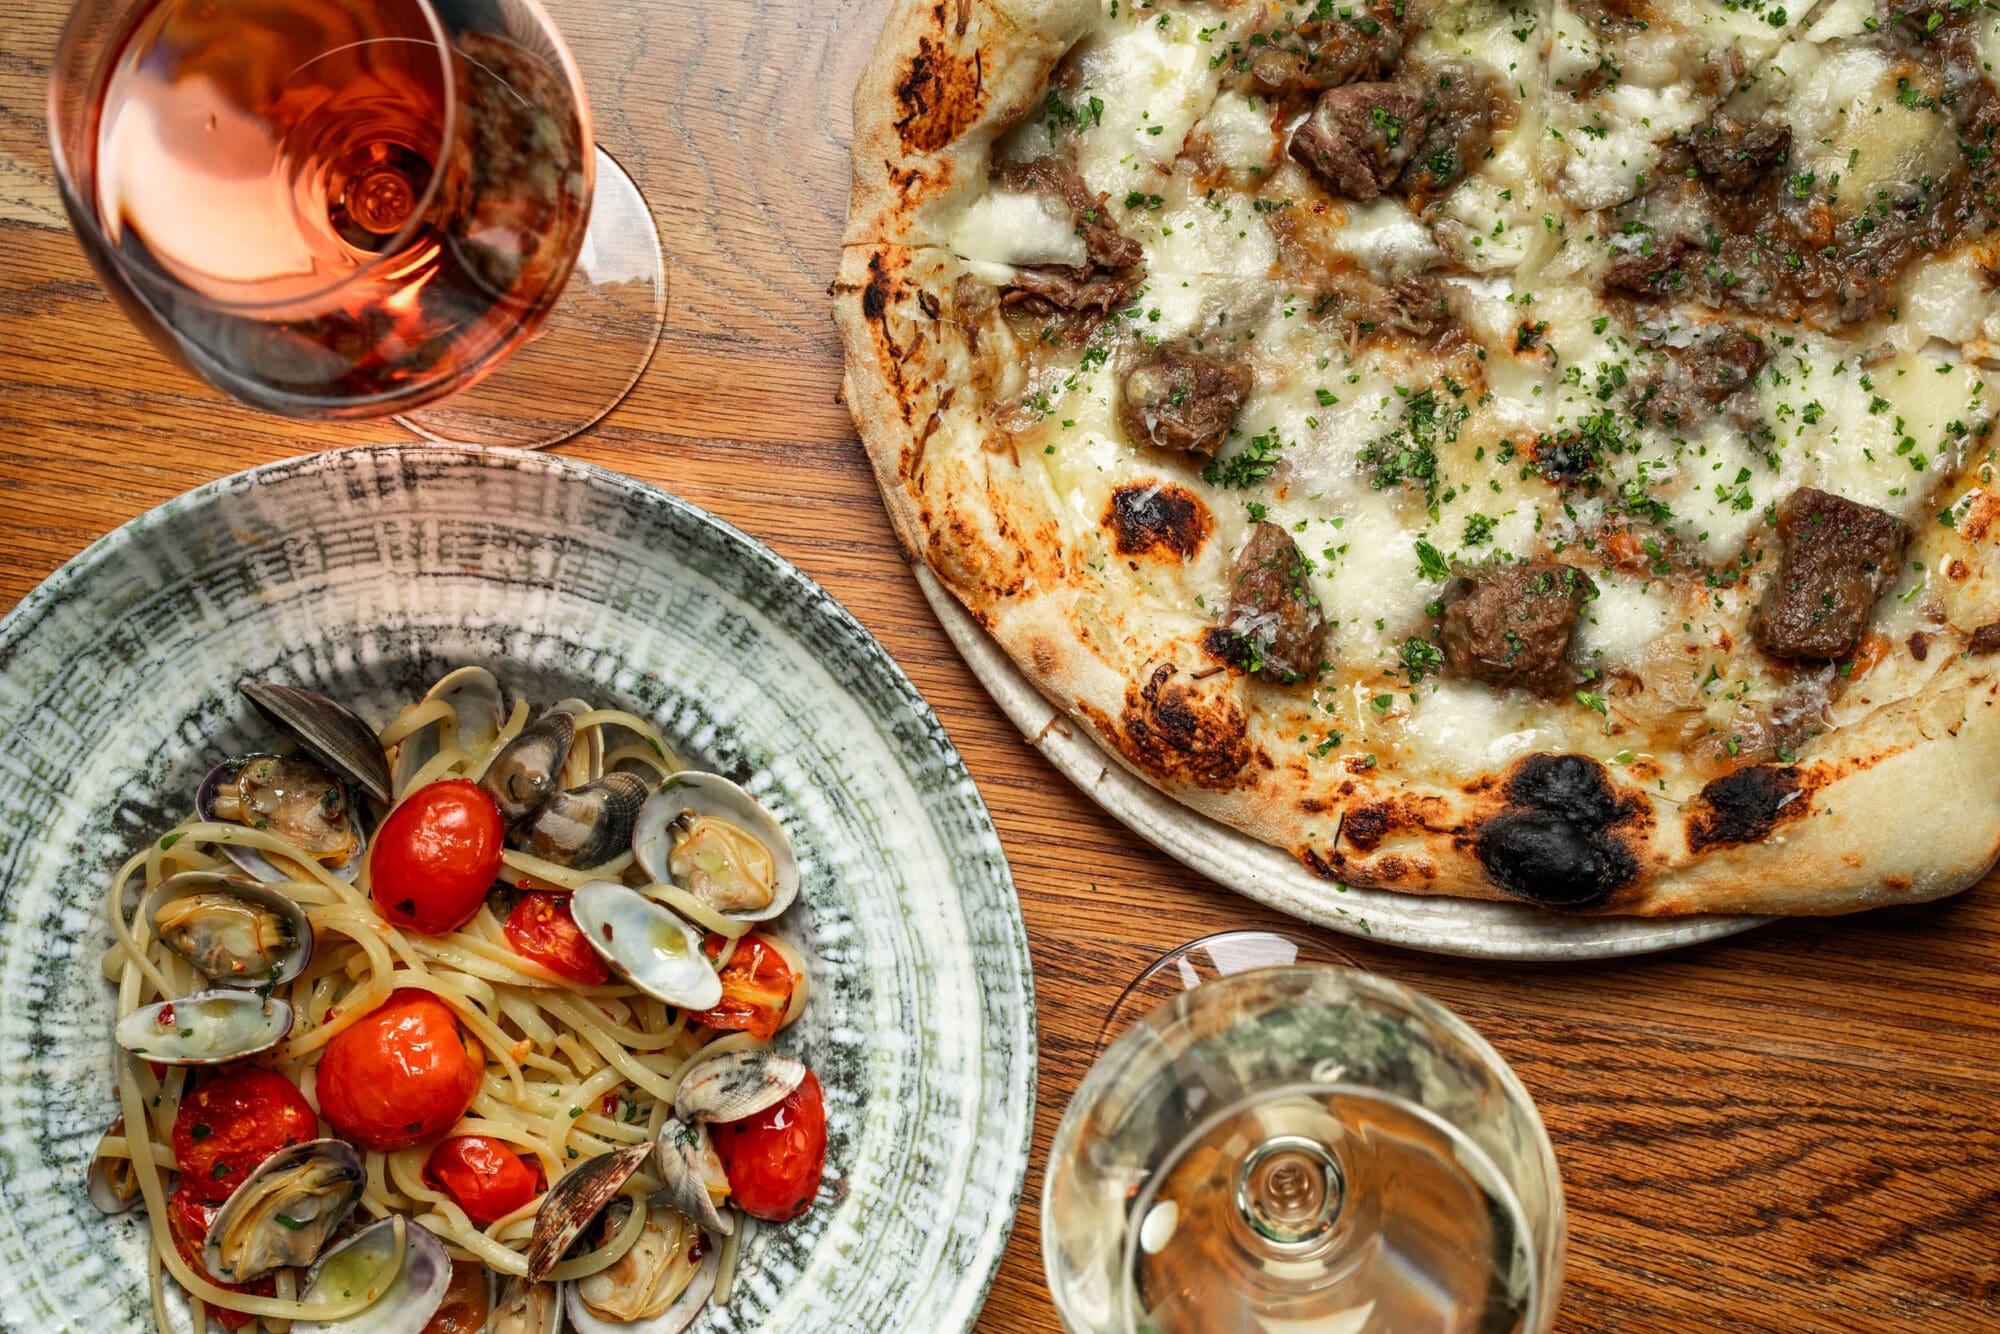 Italian pizza and seafood pasta served with wine